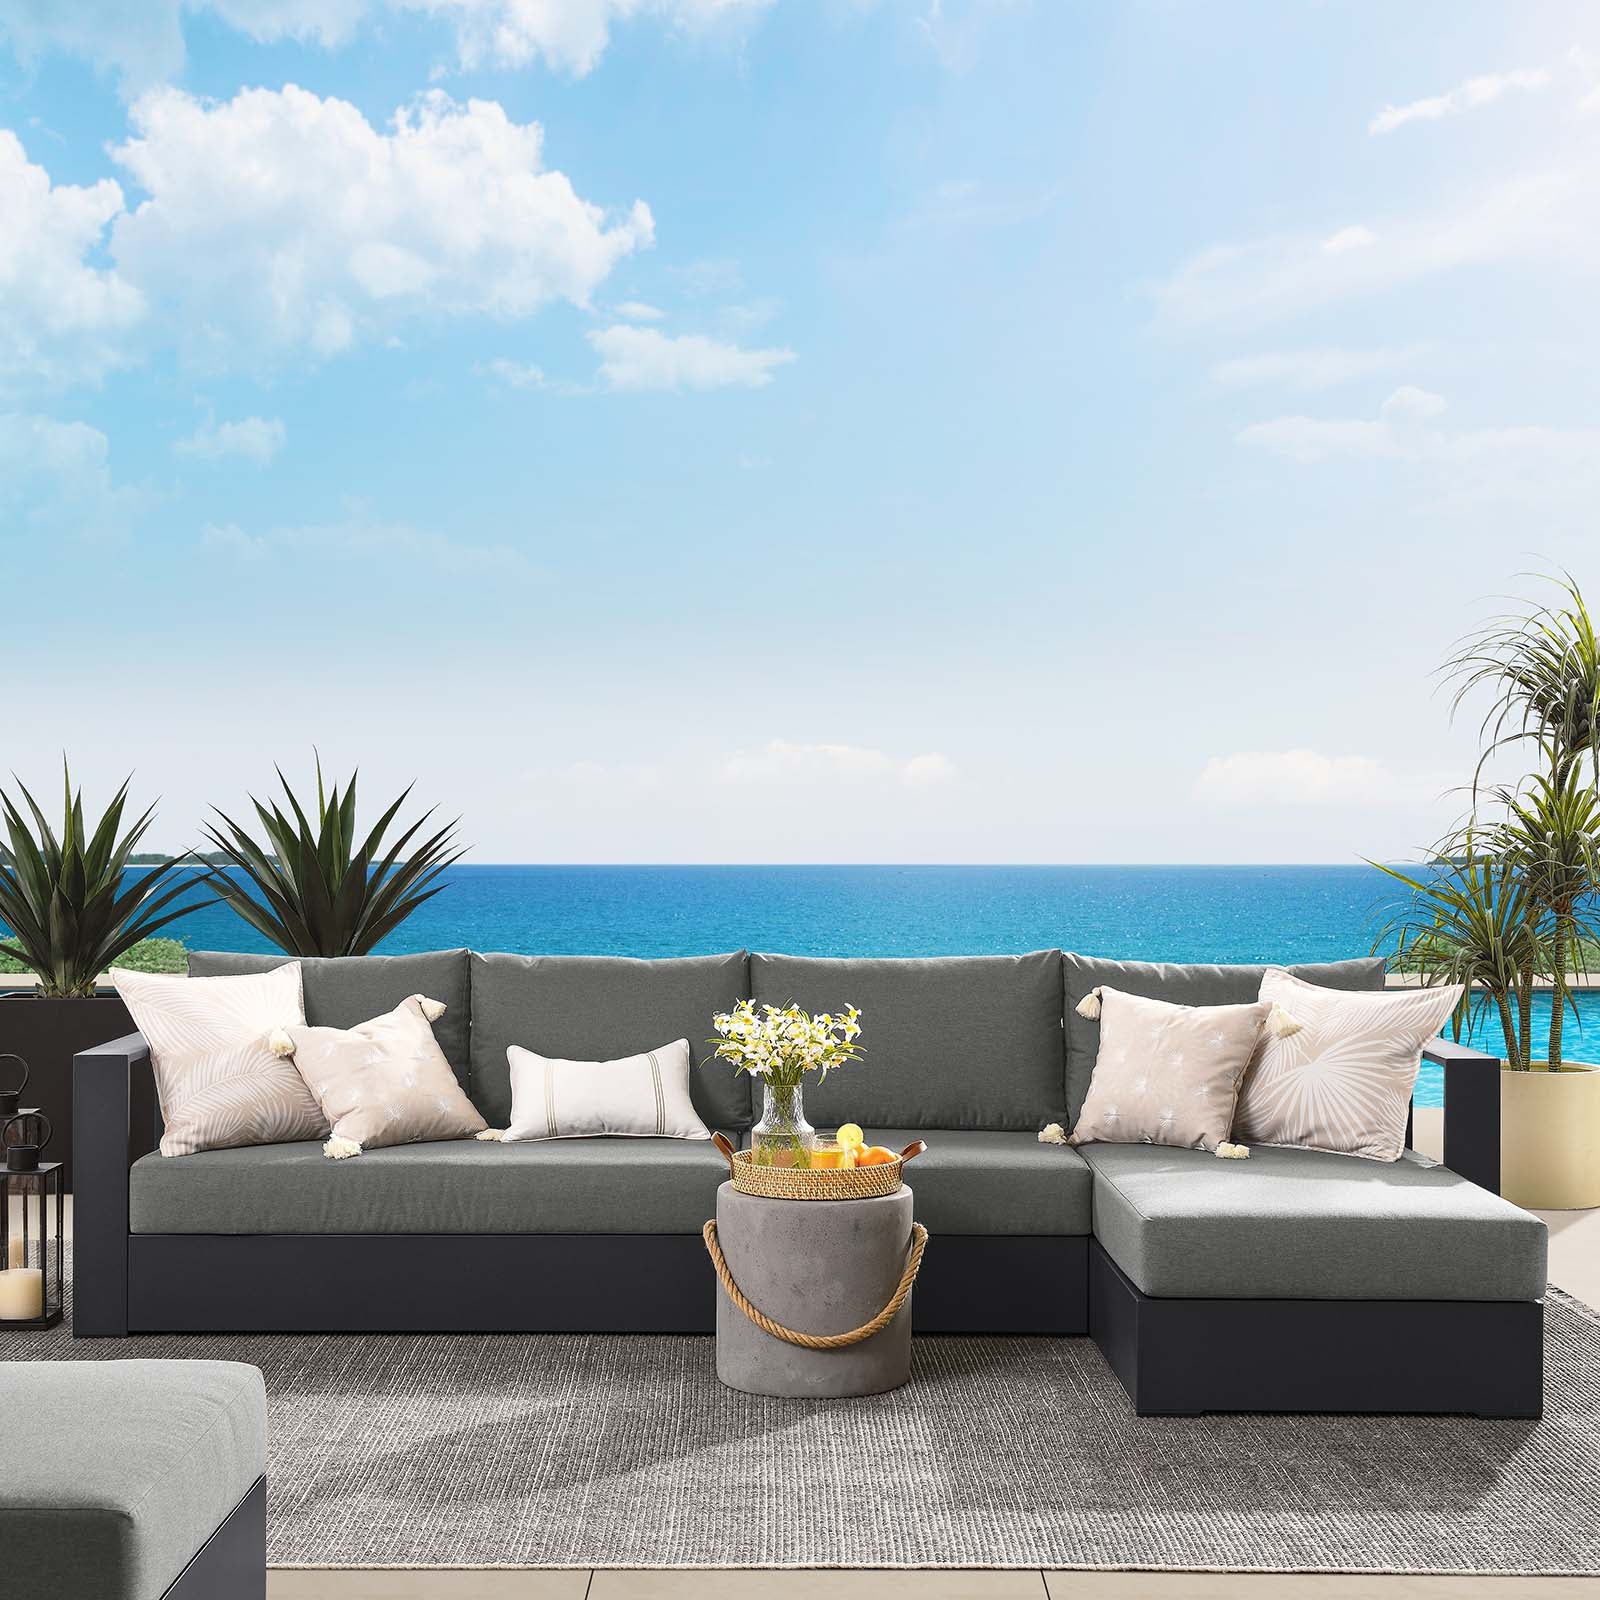 Tahoe Outdoor Patio Powder-Coated Aluminum 3-Piece Right-Facing Chaise Sectional Sofa Set - East Shore Modern Home Furnishings